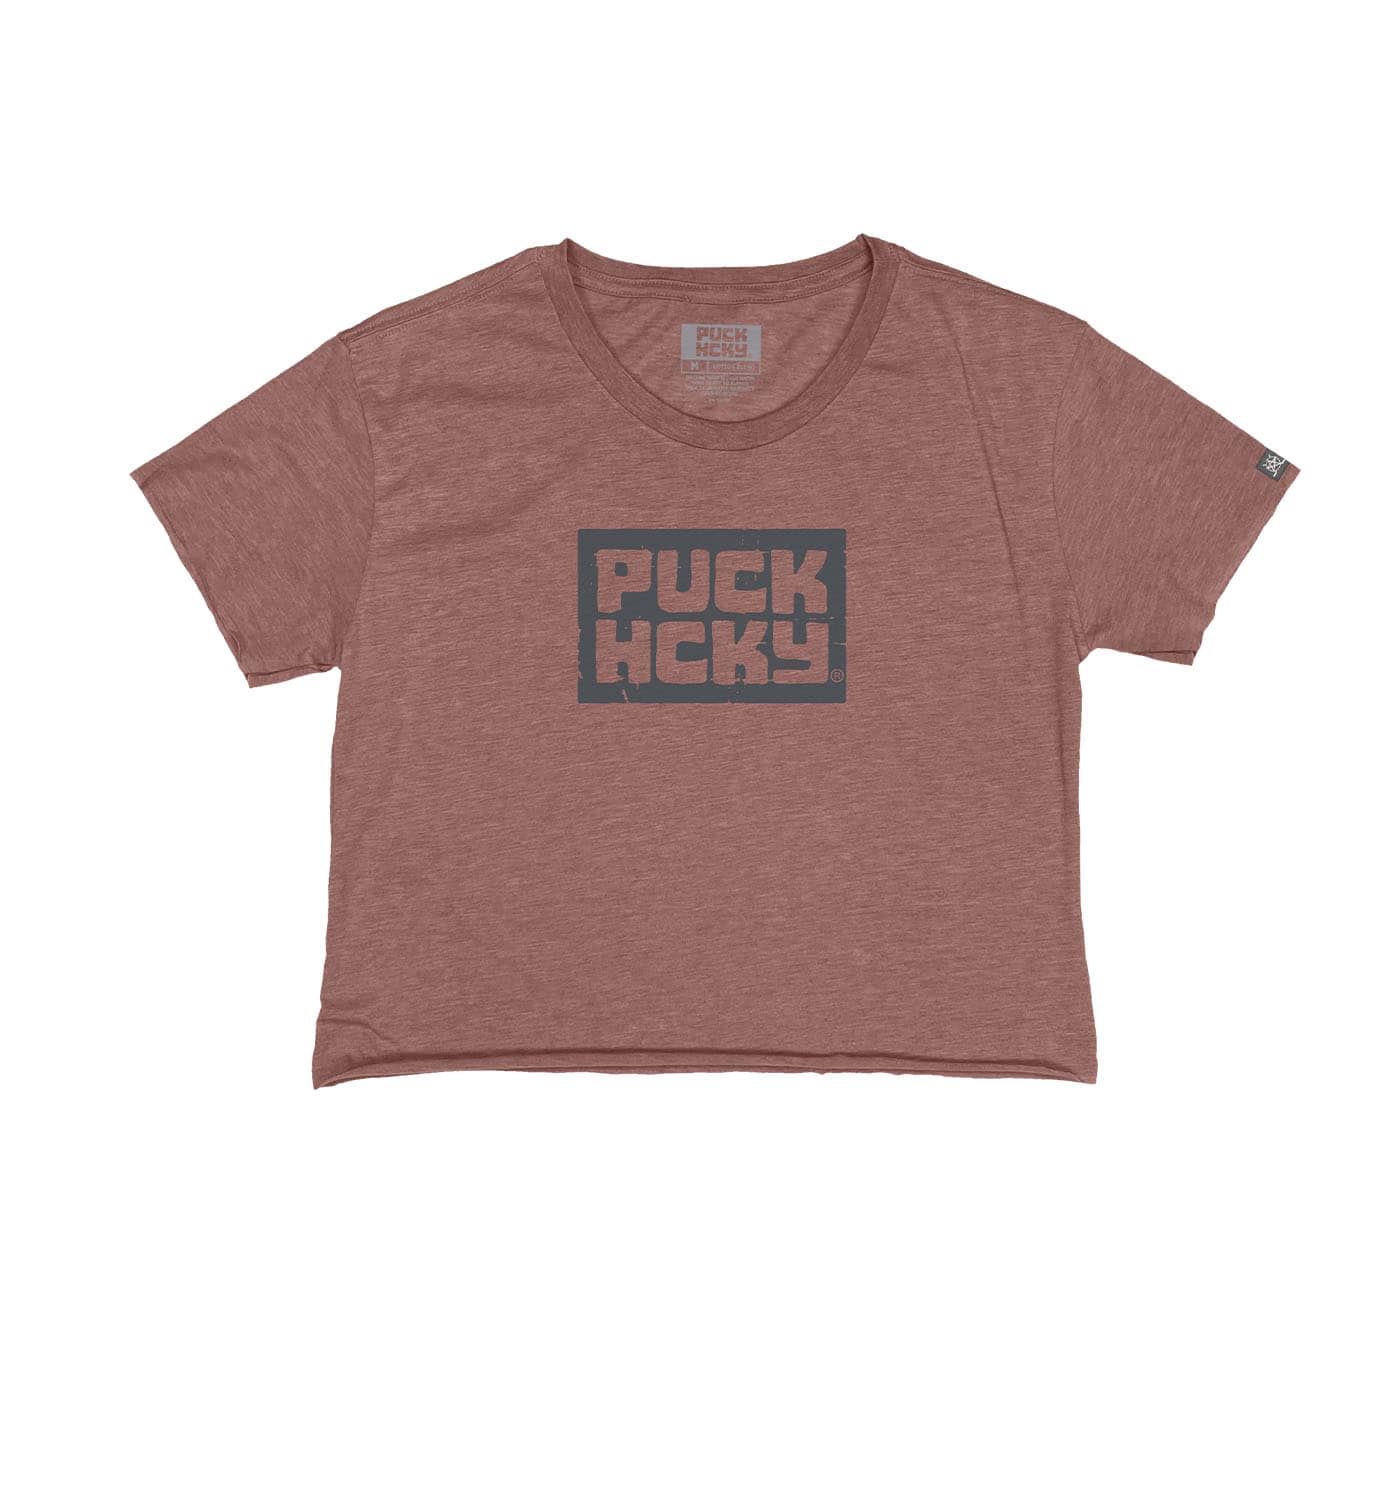 PUCK HCKY 'BOX' women's hockey crop top in pink front view